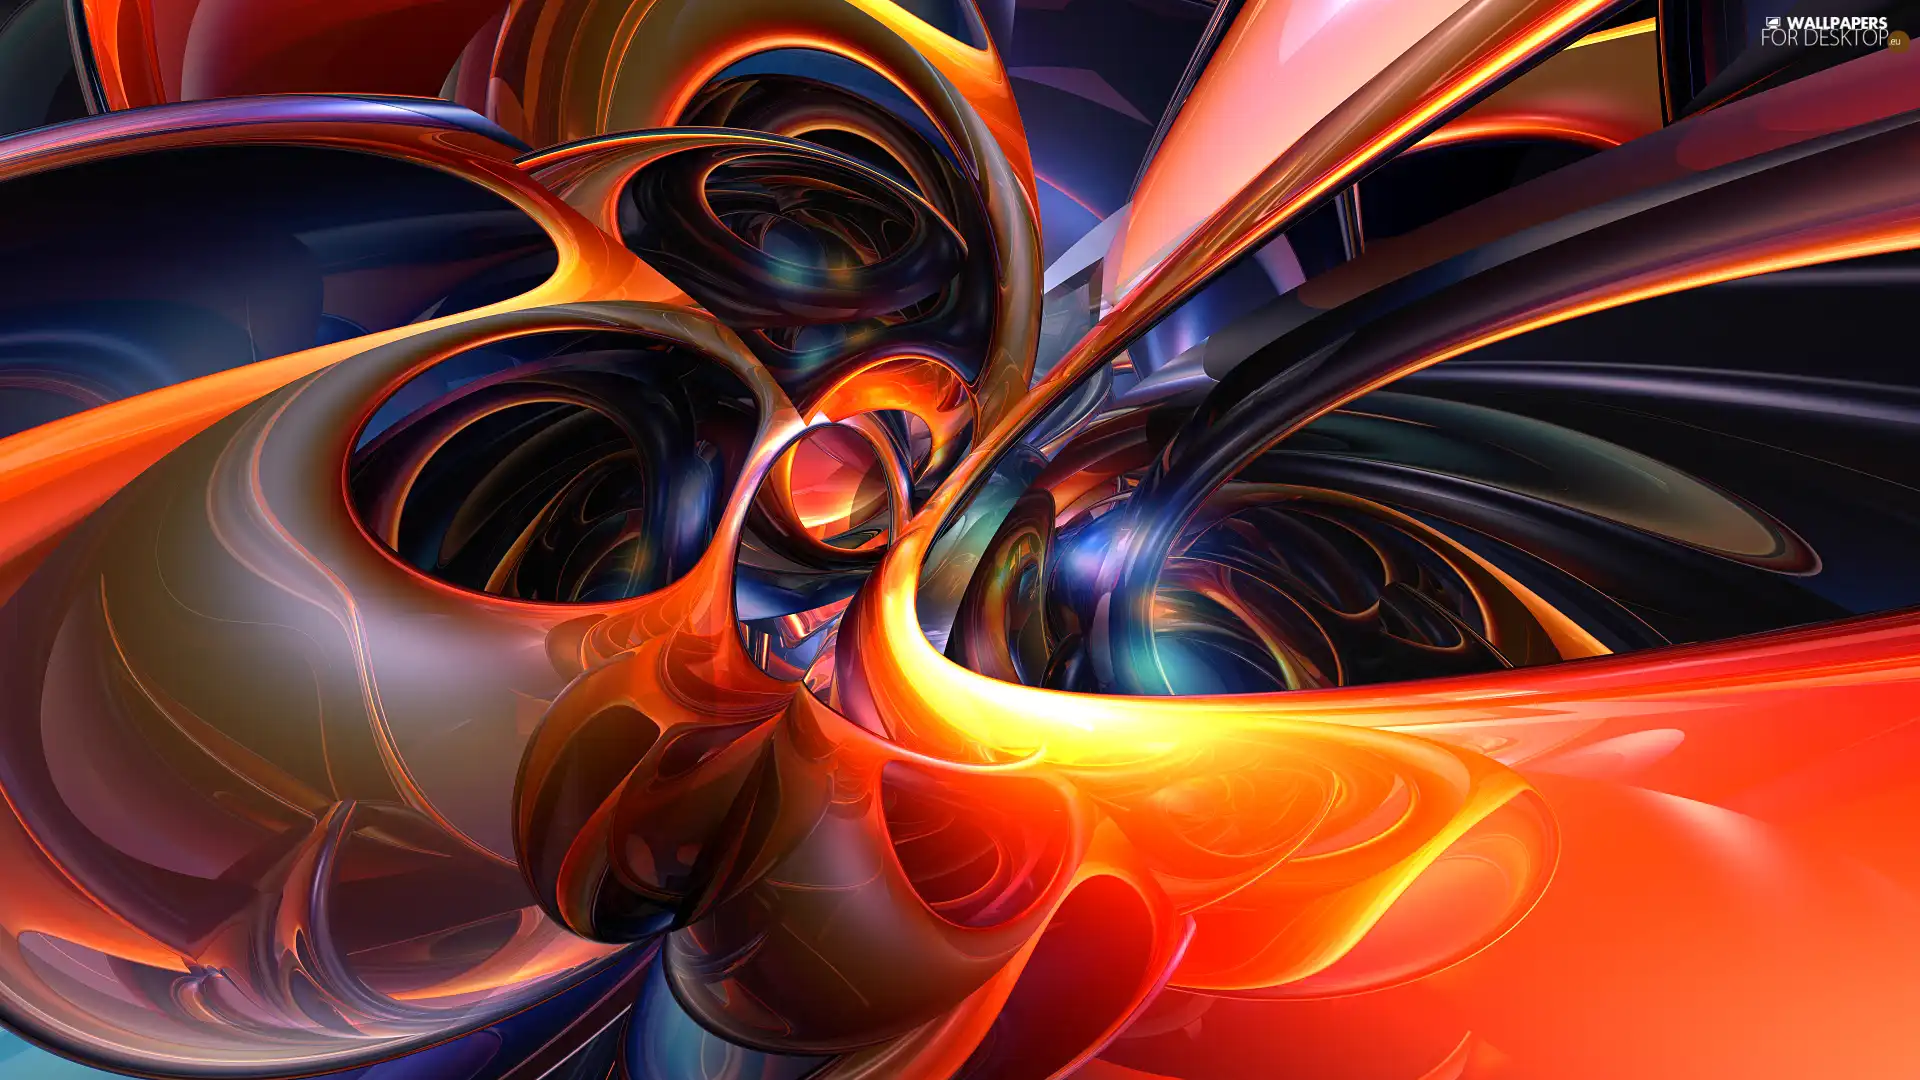 Tunnels, 3D Graphics, abstraction For desktop wallpapers